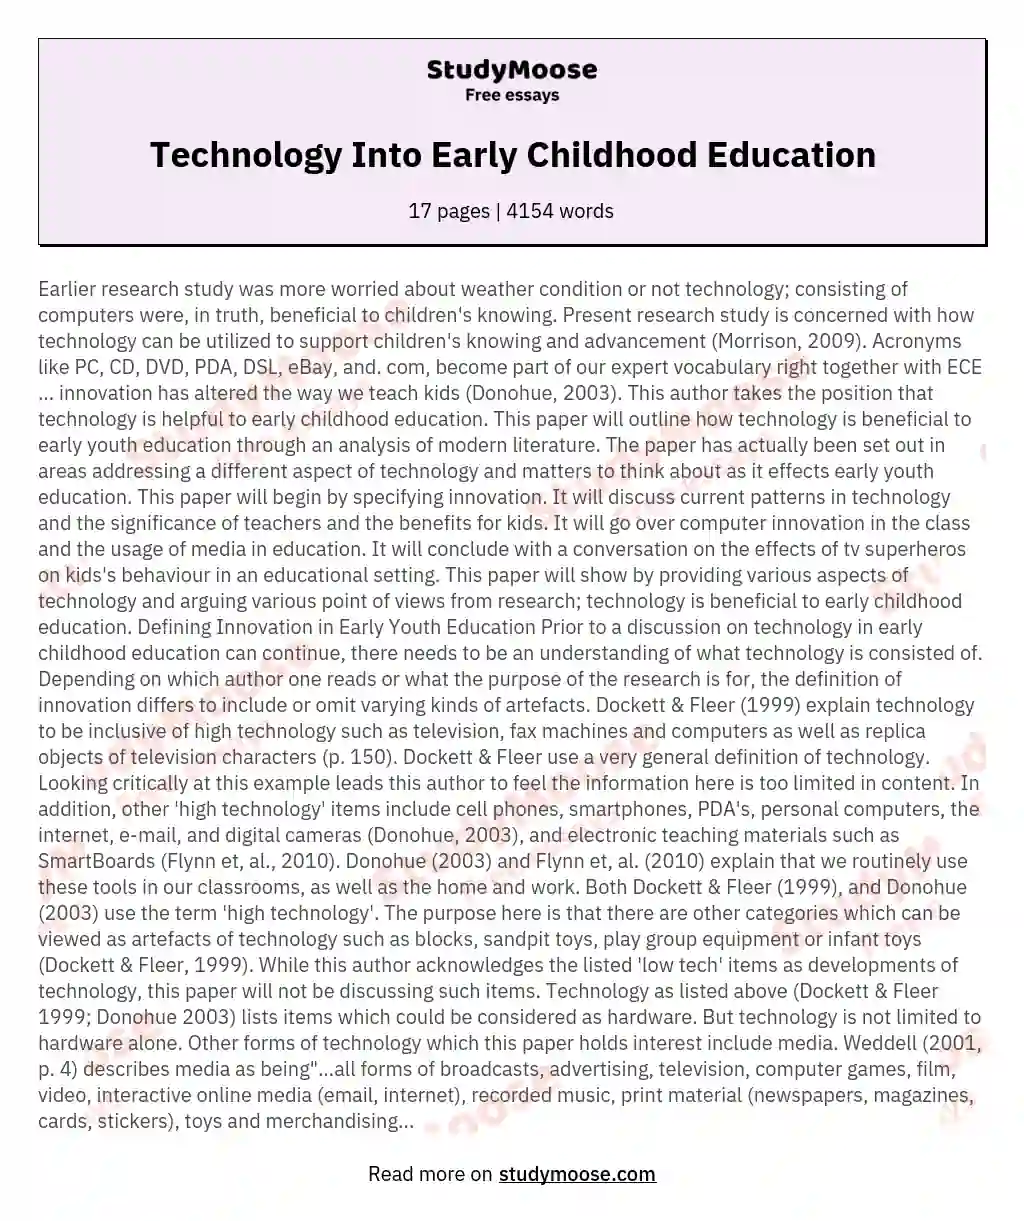 Technology Into Early Childhood Education essay